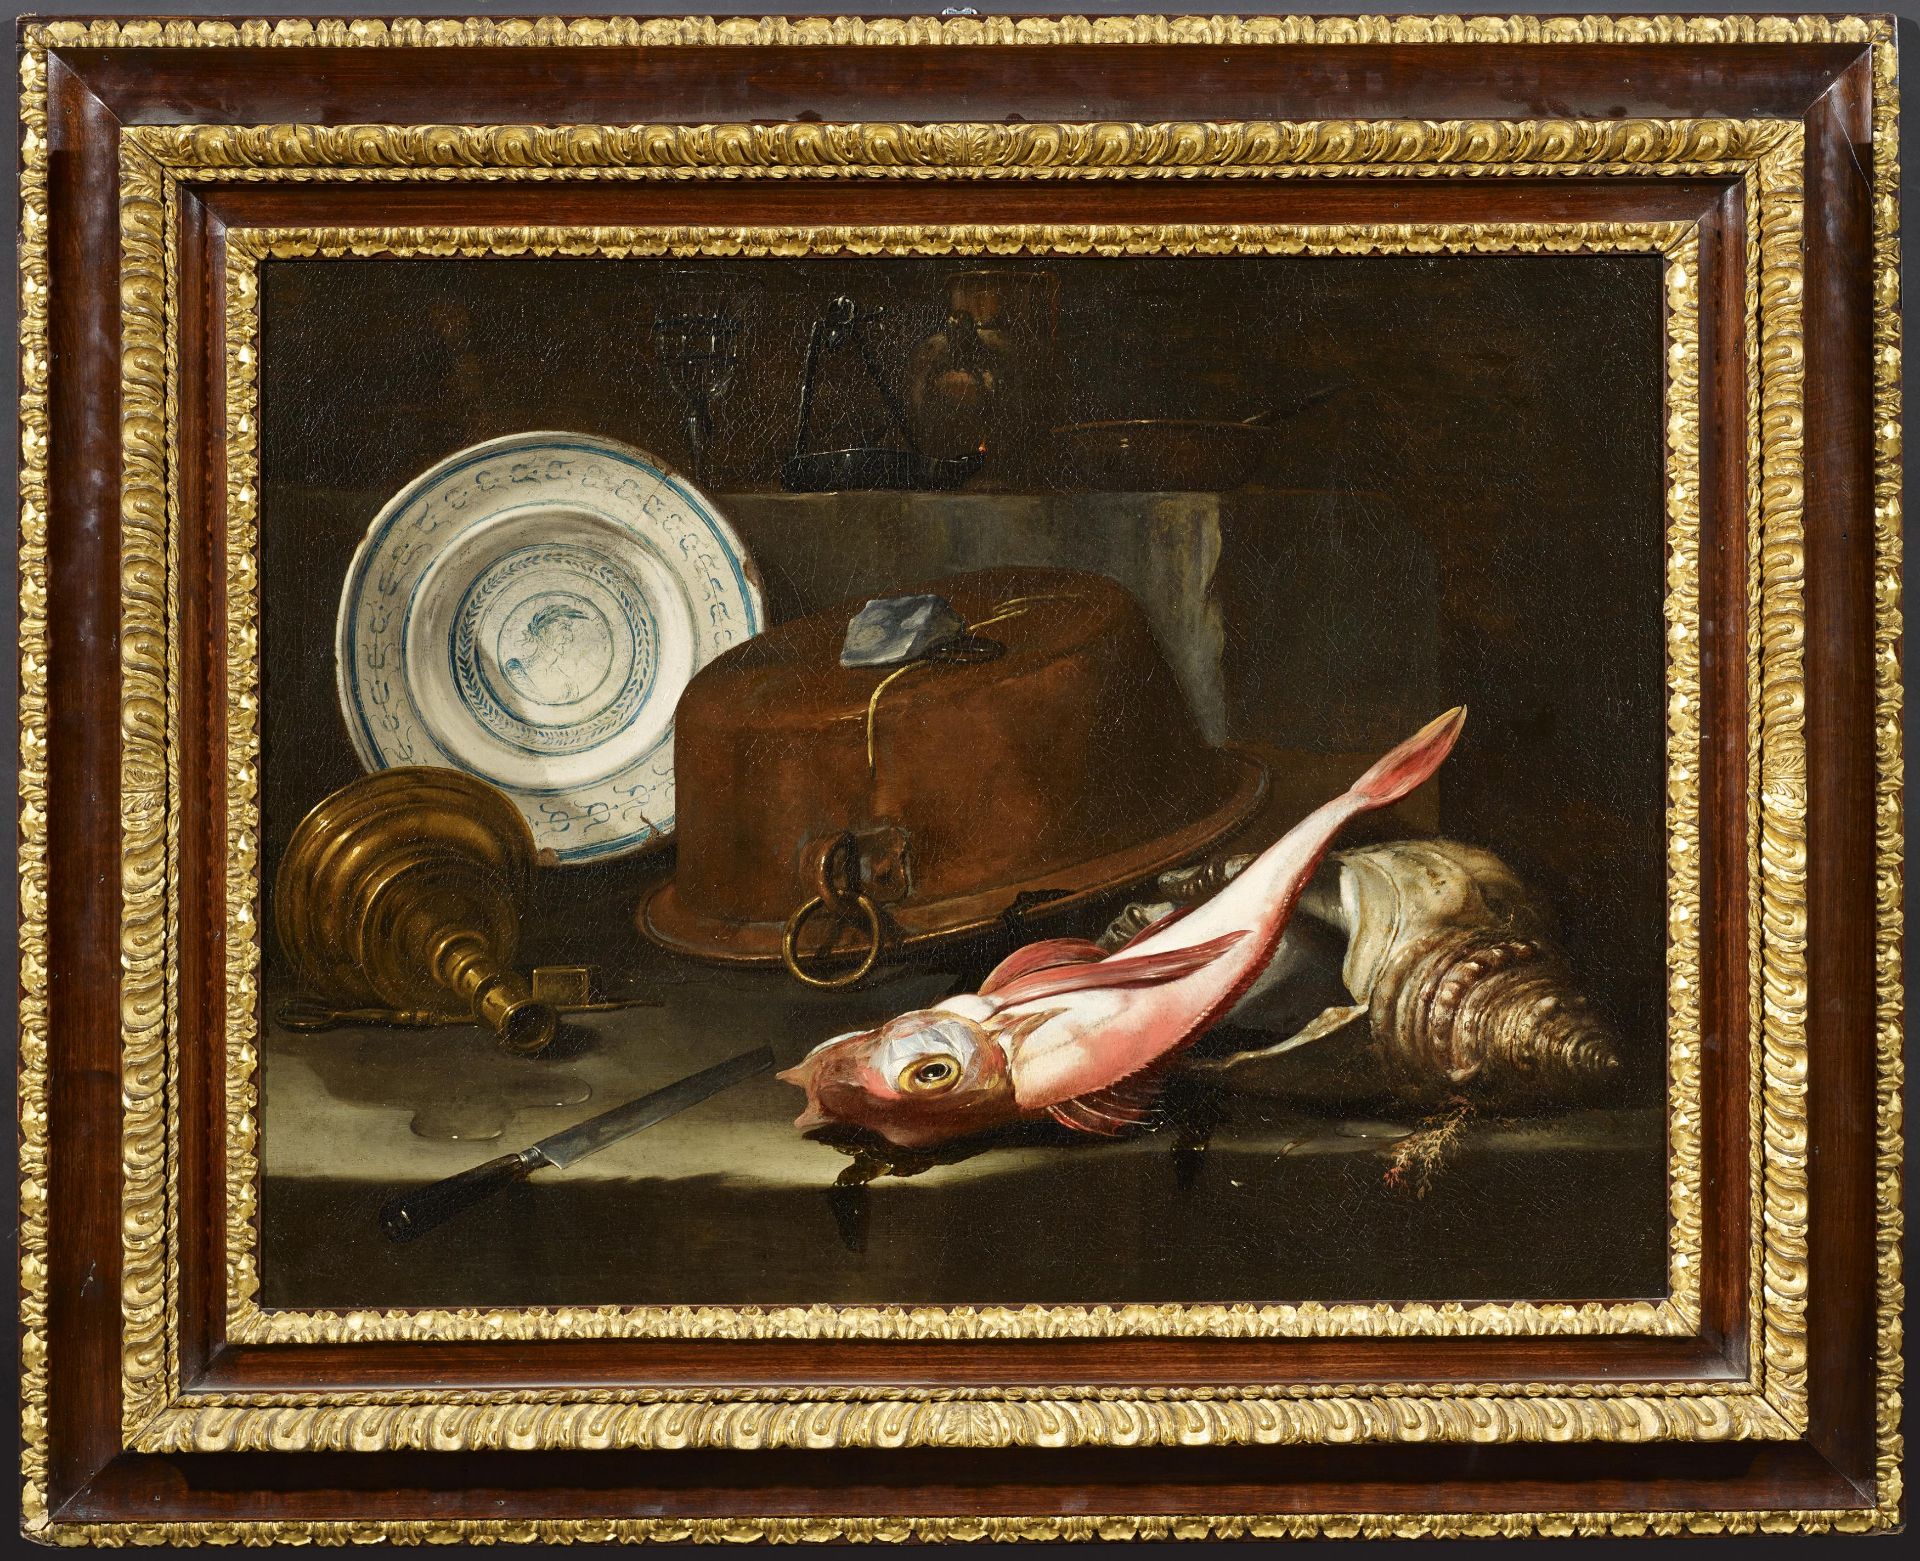 MONOGRAMMIST I.A.2nd half of the 17th centuryTitle: Still Life with Fish, Copper Kettle and - Image 2 of 4